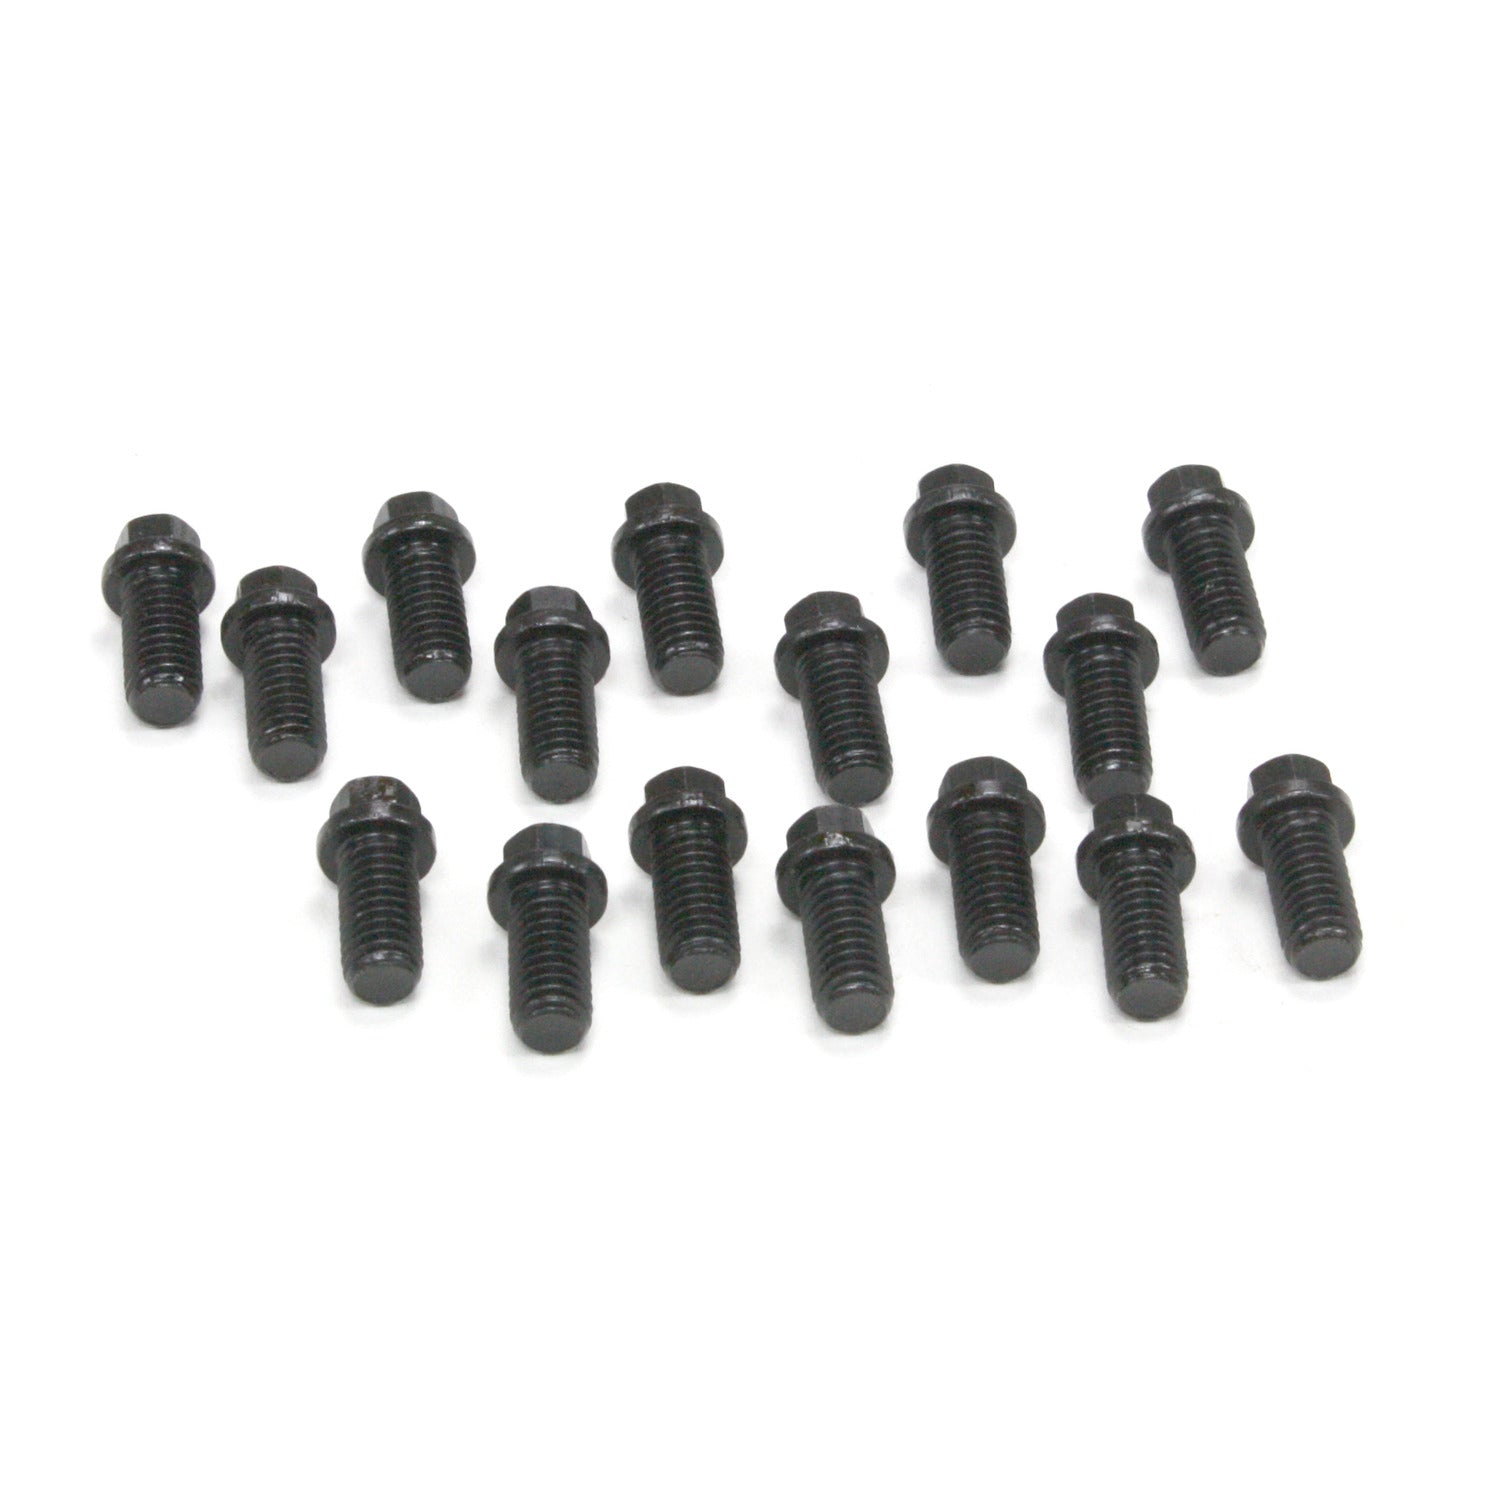 Patriot Exhaust H7971 3/8-16 x 3/4 Zinc plated header bolts (pack of 16)